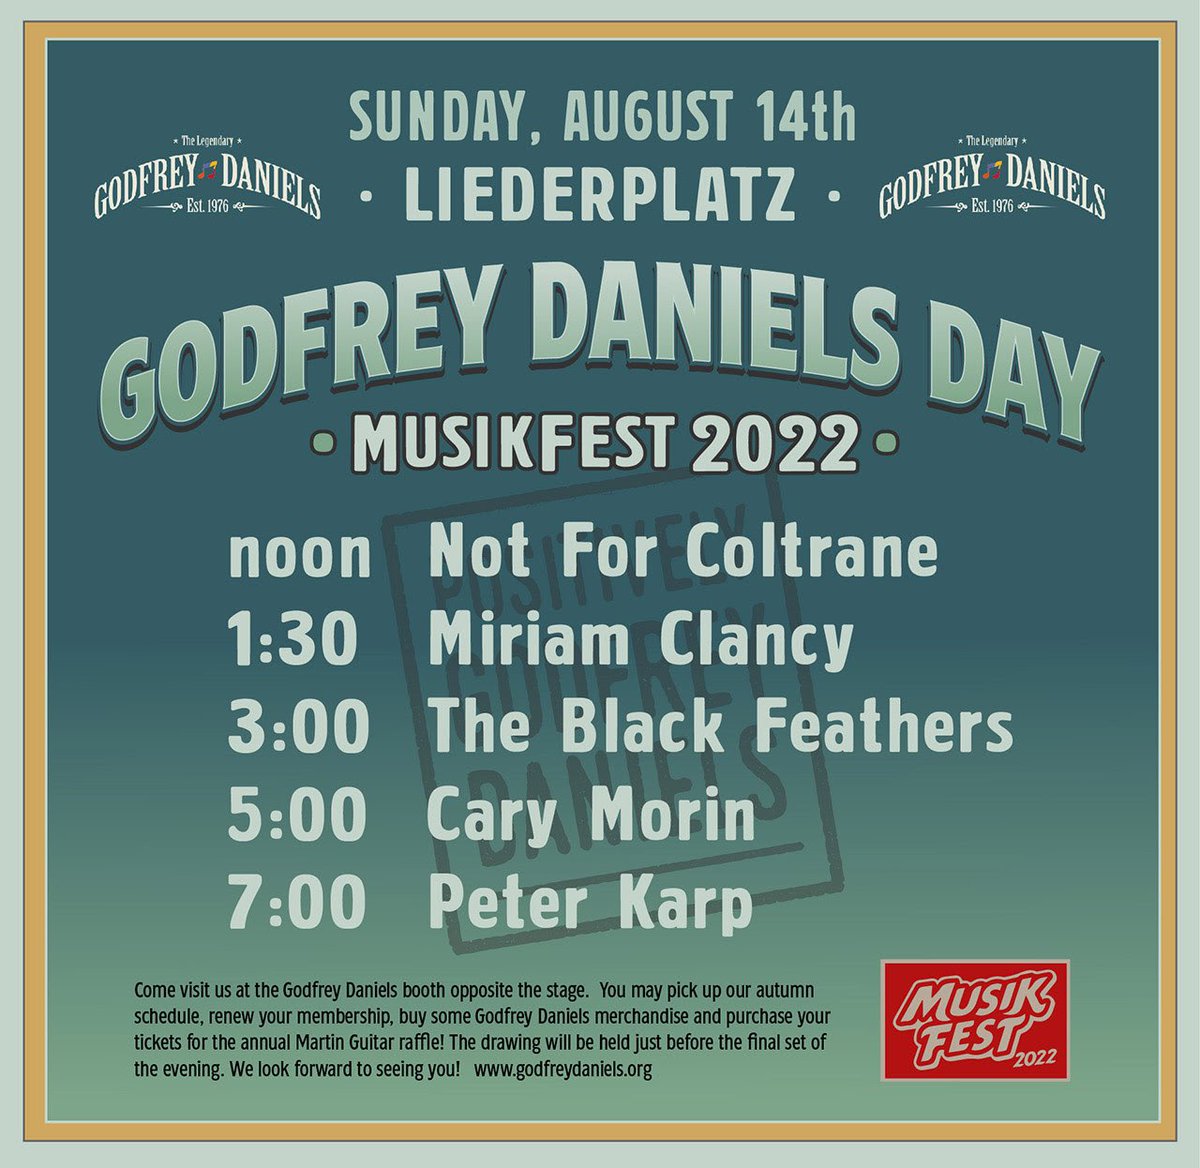 The tents are up! Musikfest returns next week. @Godfrey_Daniels Day will be Sunday, Aug. 14th at Liederplatz noon to 8:30 with a great lineup! @NotForColtrane @miriamclancy @theblackfeathers and Peter Karp and Cory Morin!!